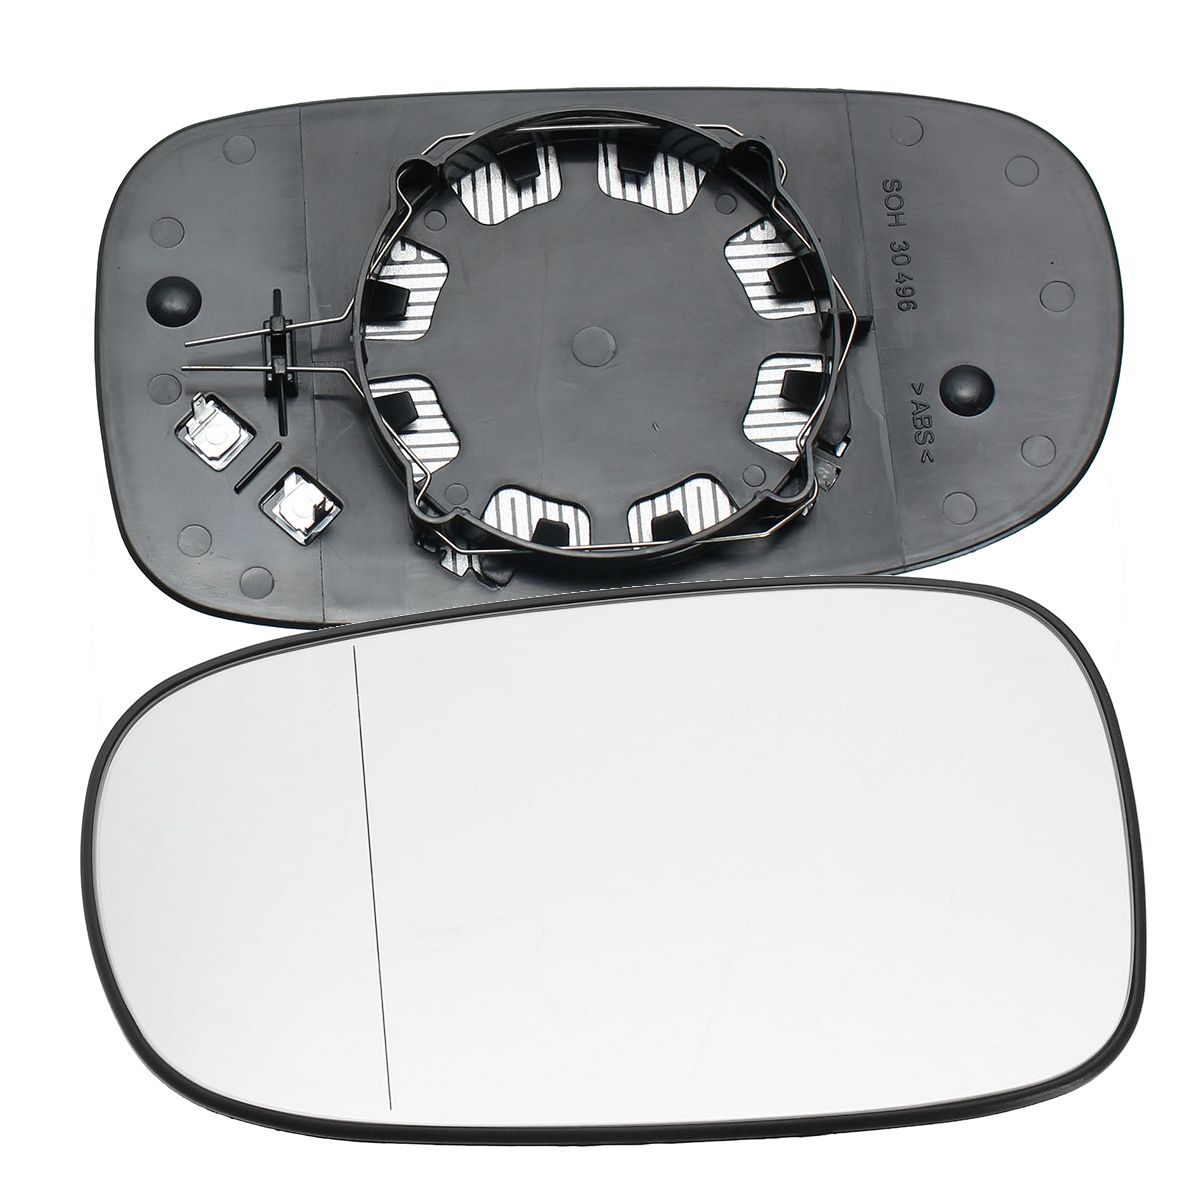 Car-Right-Side-Door-Wing-Mirrors-Glass-Wide-Angle-For-SAAB-9-3-93-2003-2010-1135444